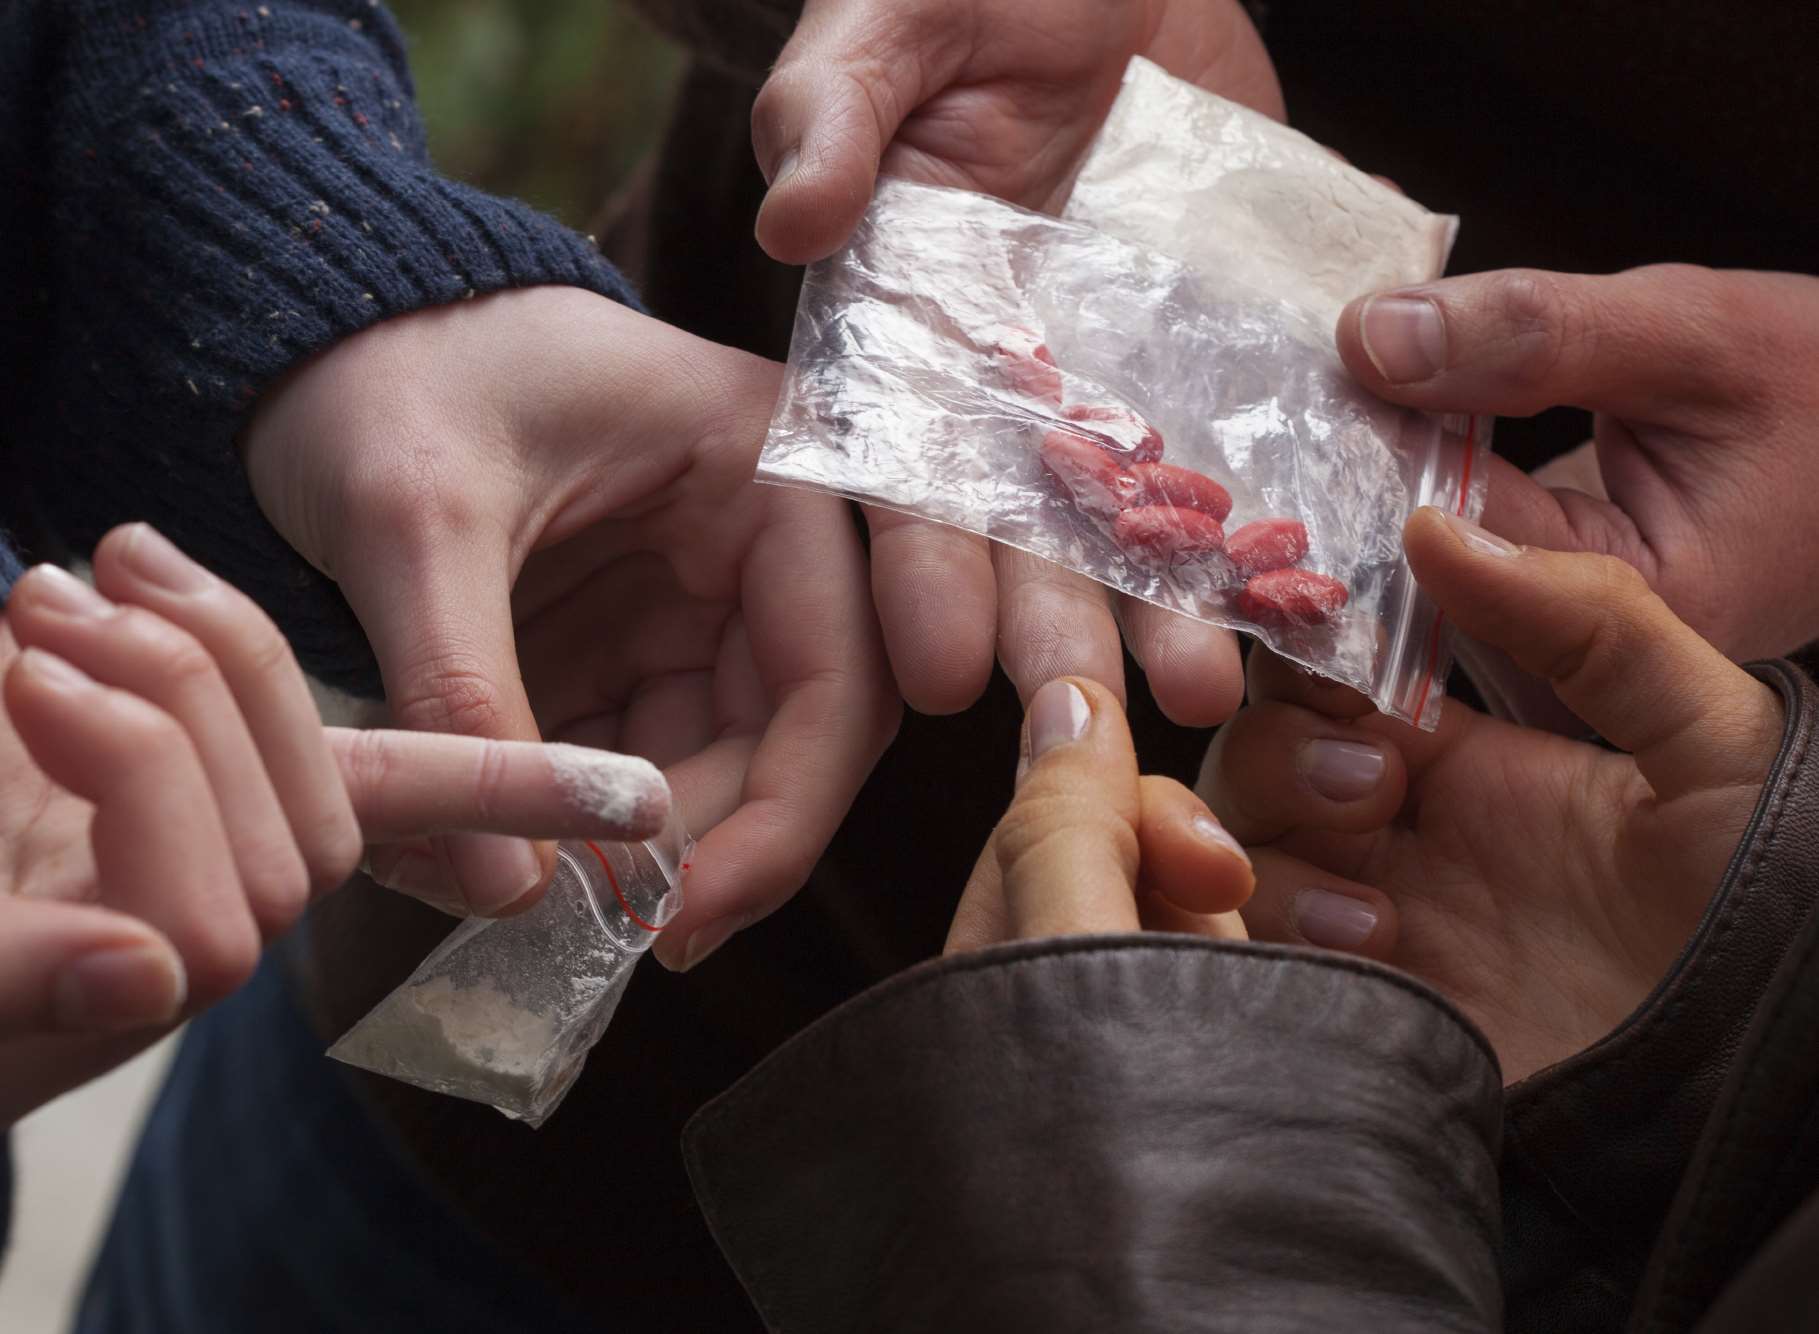 A Kent MP has hosted a debate about the cost of drug addiction